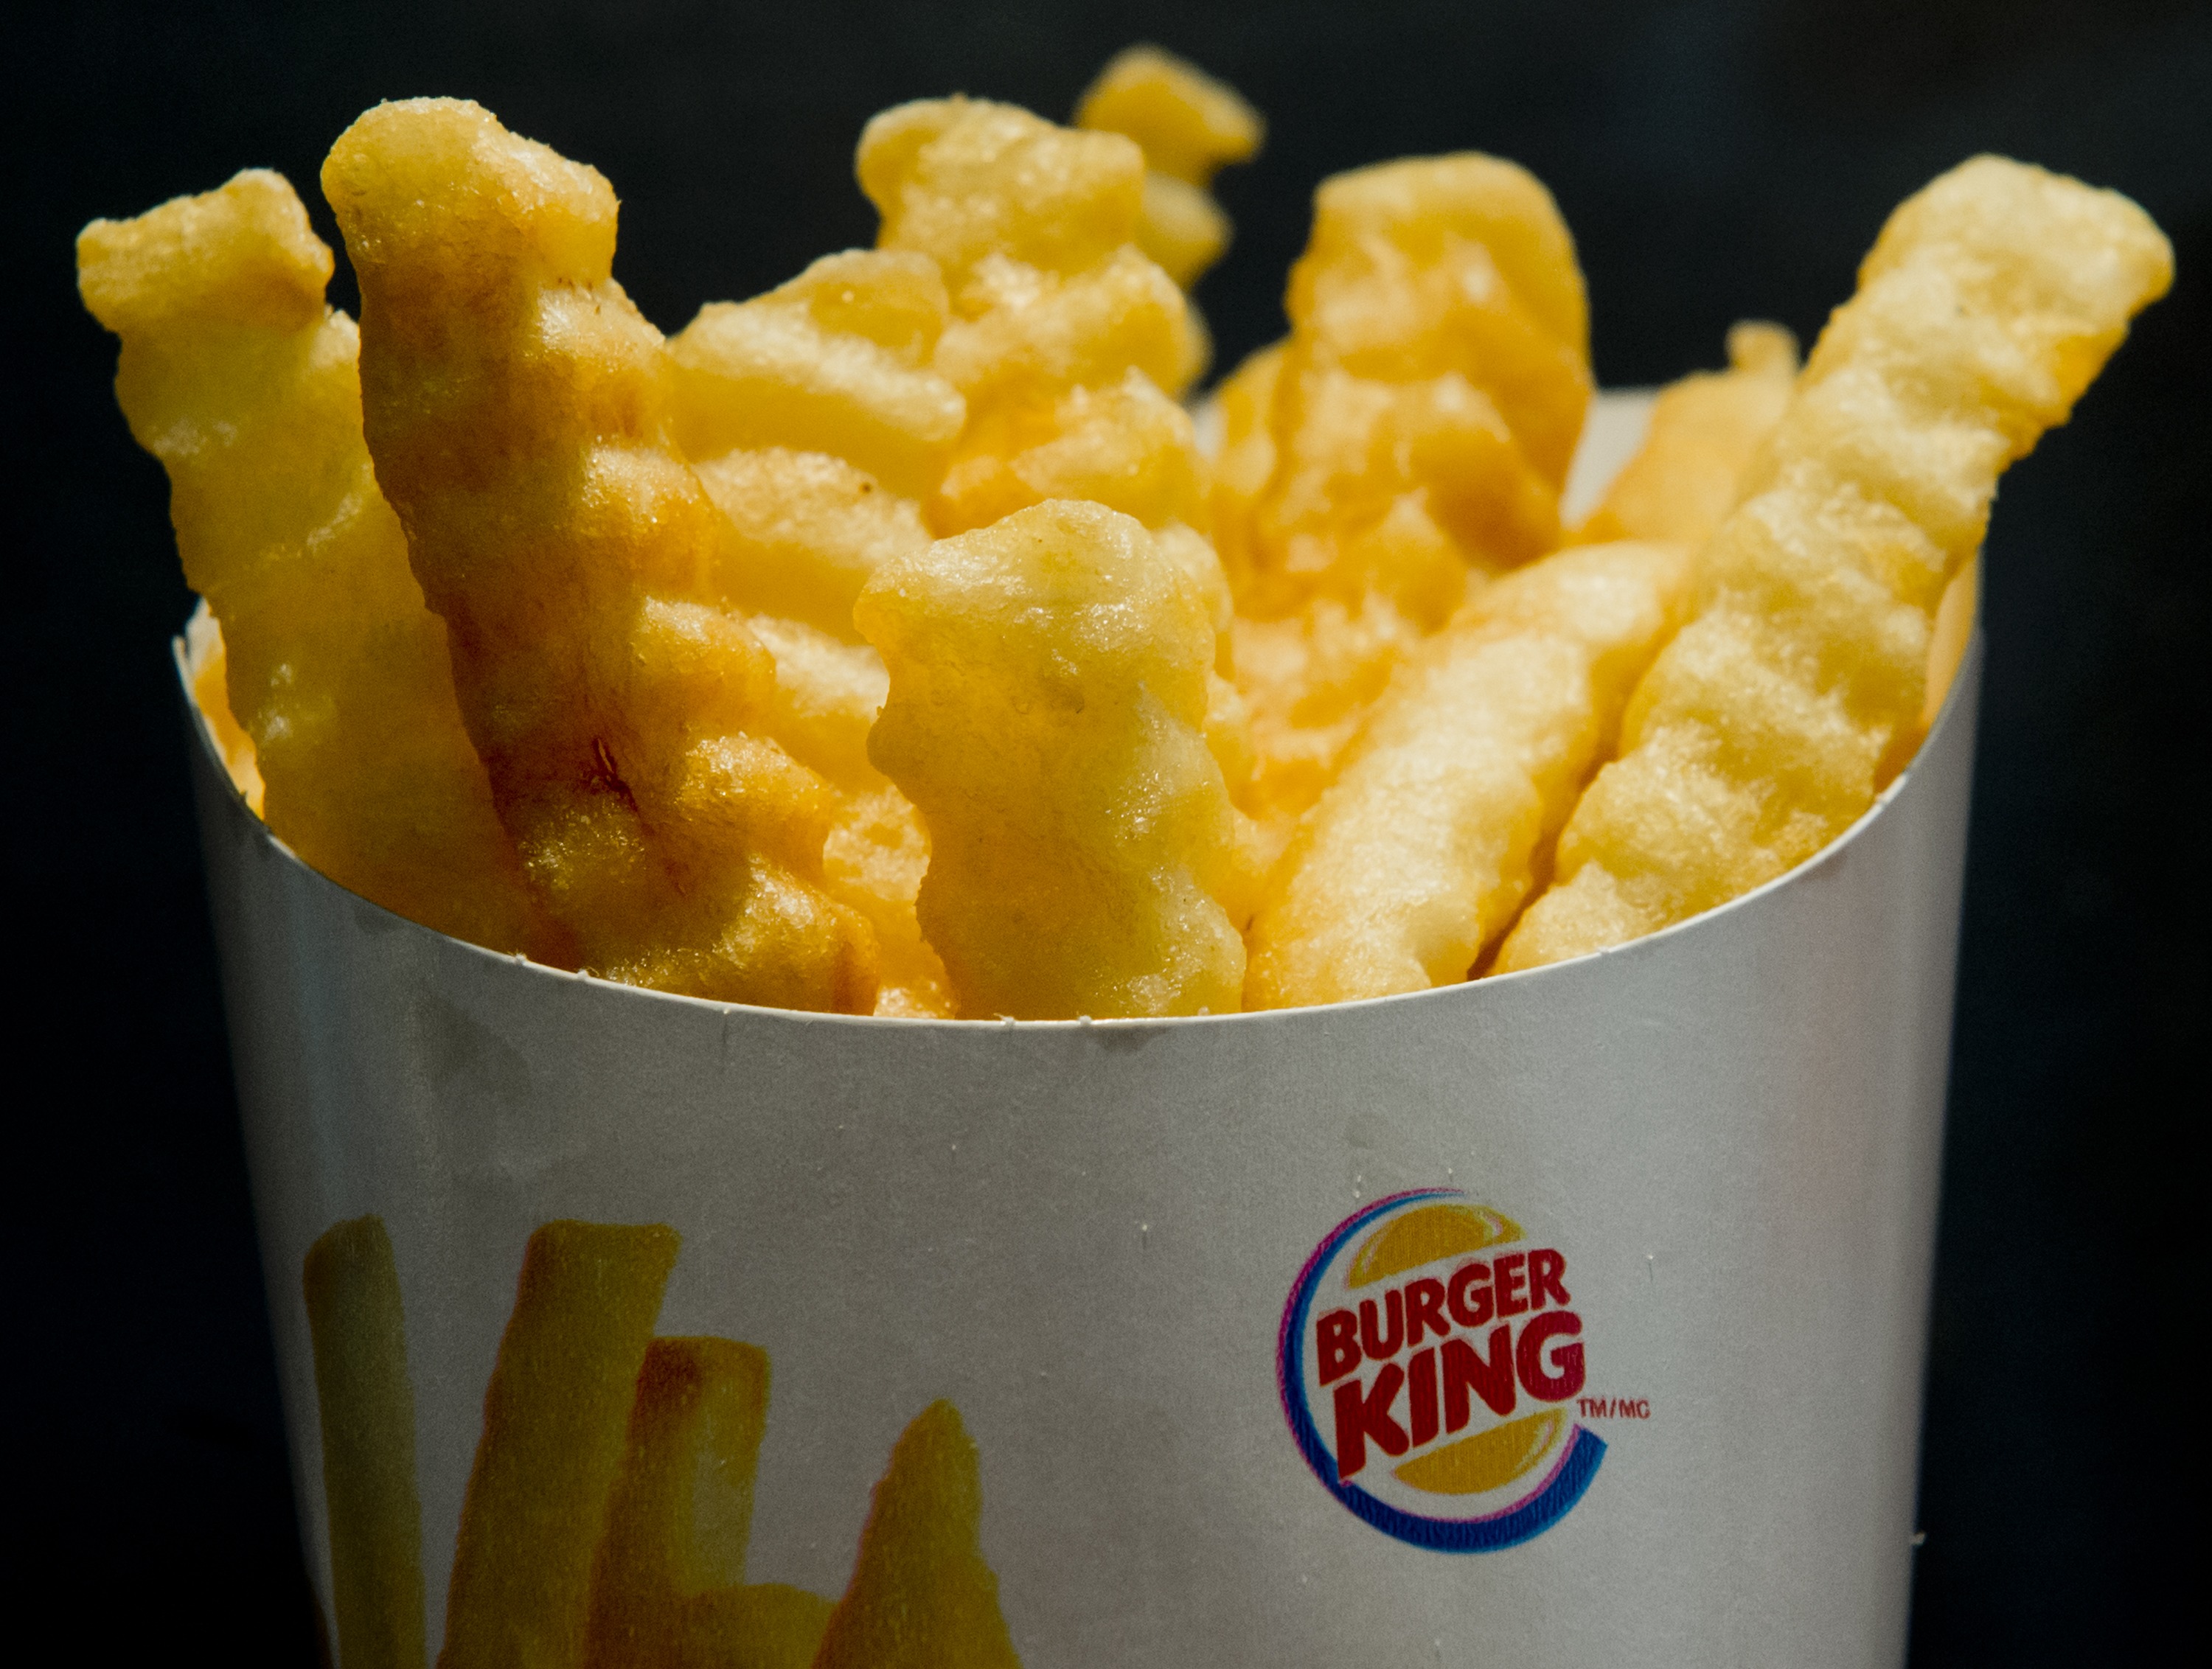 Satisfries, a lower calorie and lower fat french fry from the fast food restaurant chain Burger King (SAUL LOEB—AFP/Getty Images)